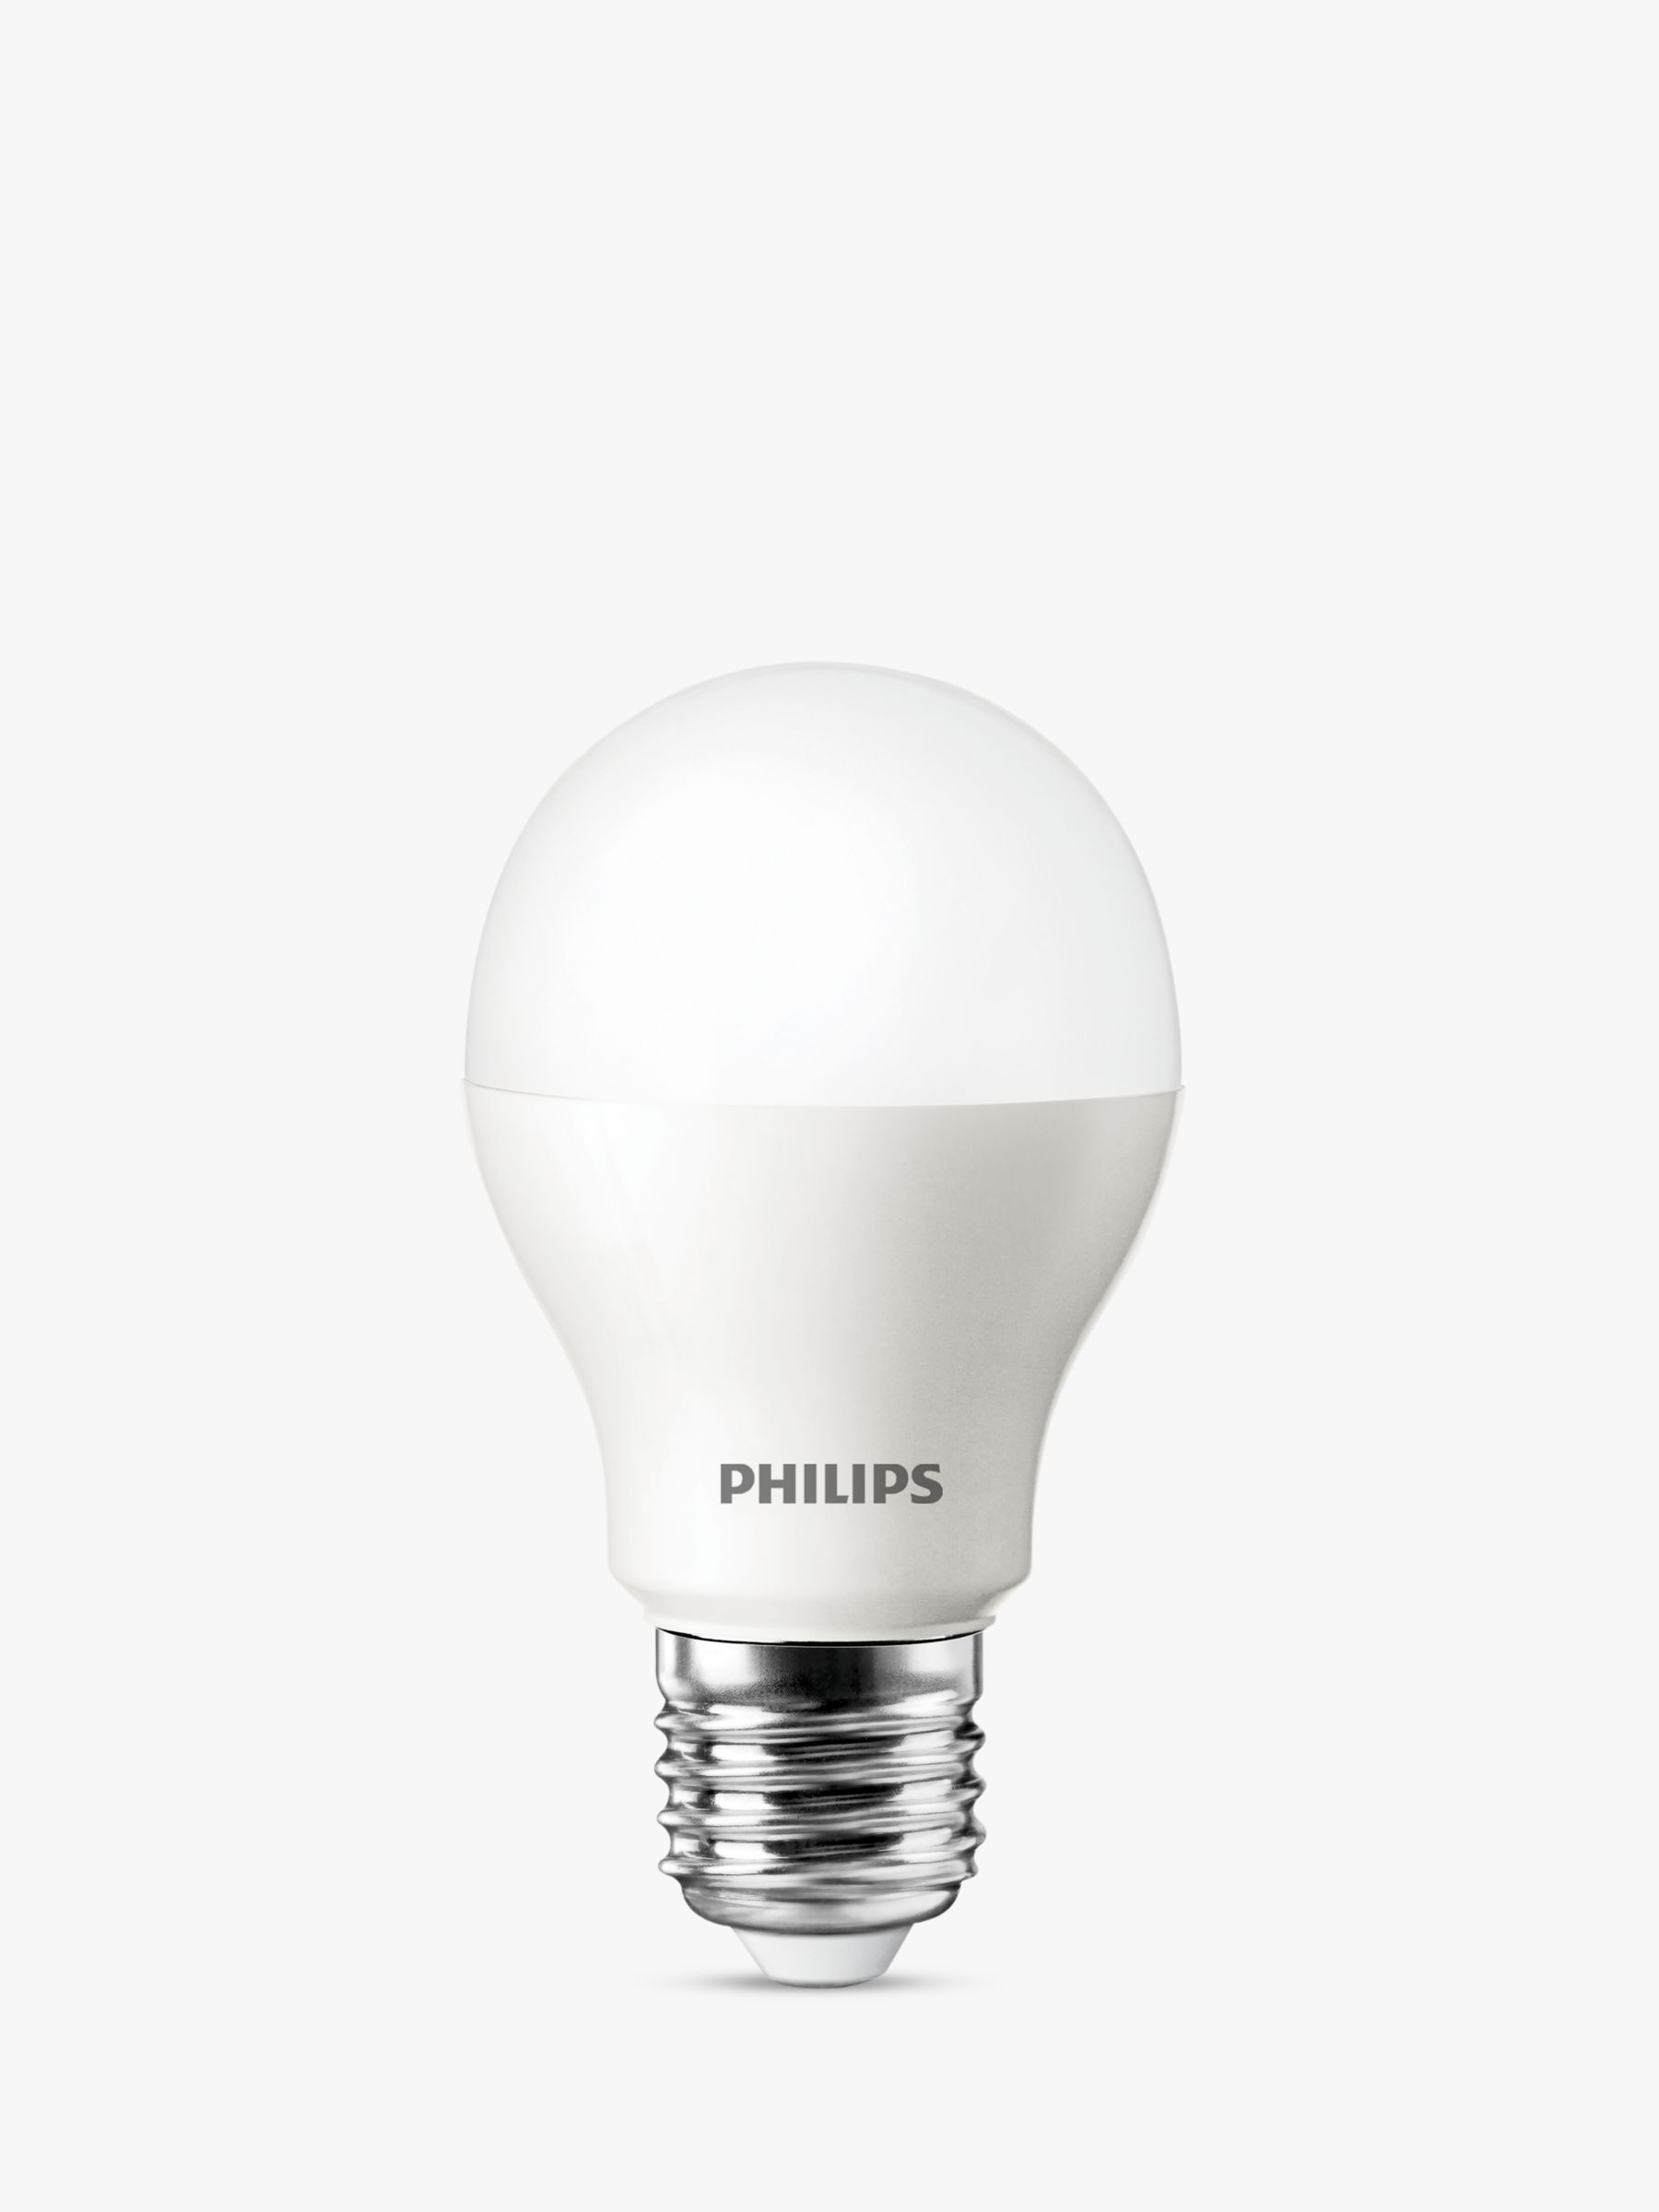 Photo of Philips 5.5w es classic led light bulb frosted